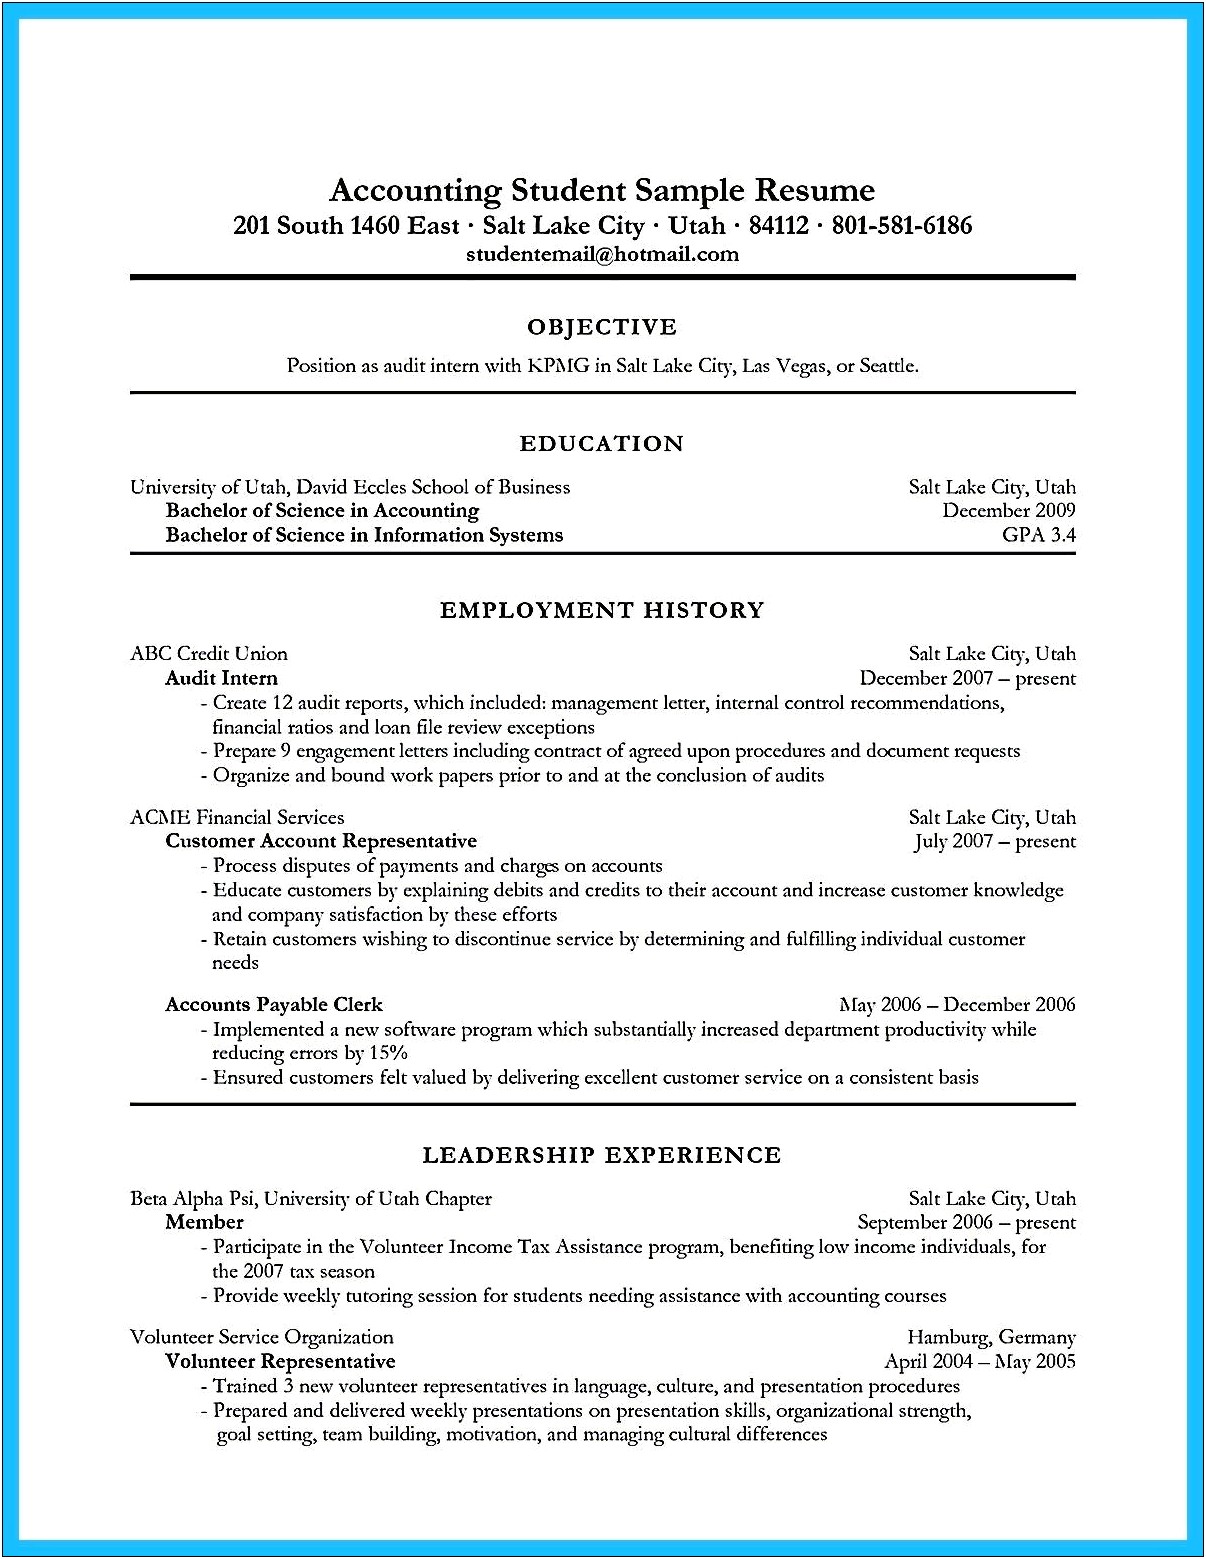 Resume Samples That Include Internship Experience